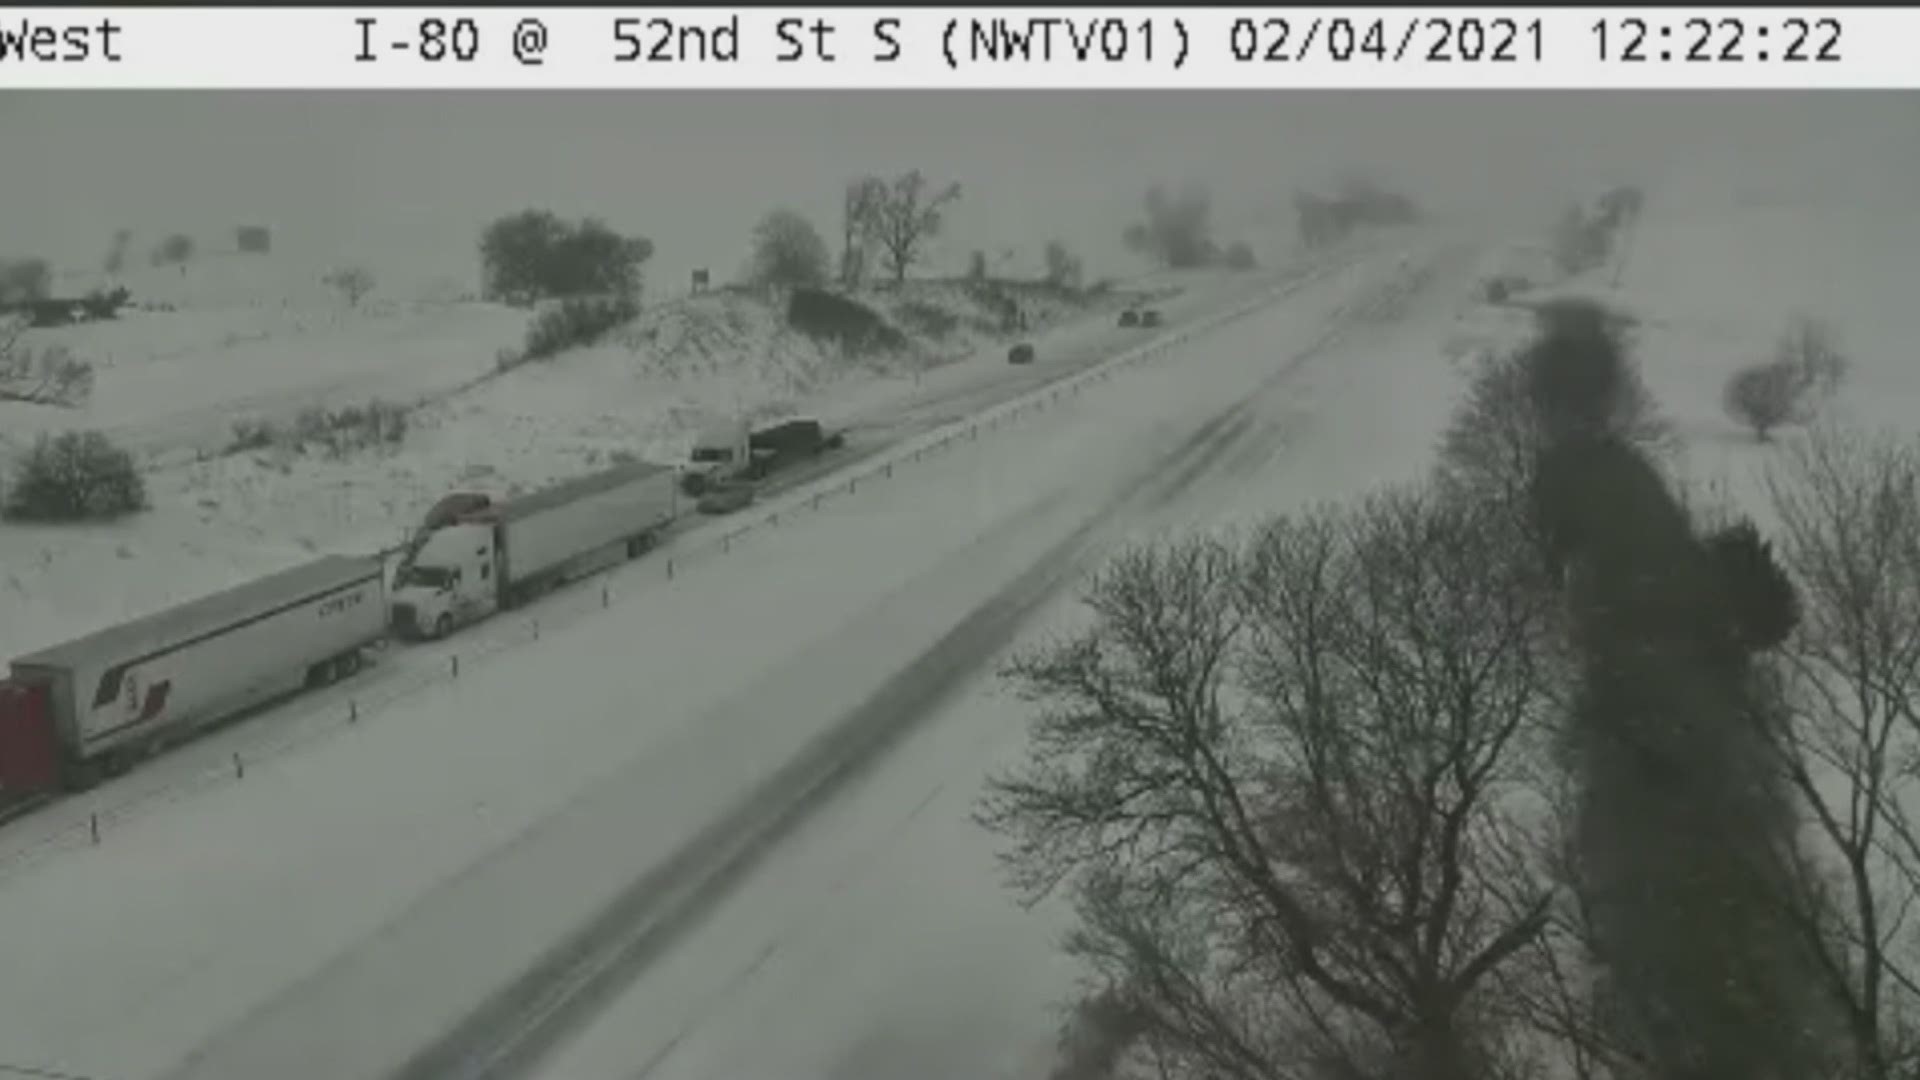 The crash happened on a day with blizzard-like conditions across the state of Iowa.